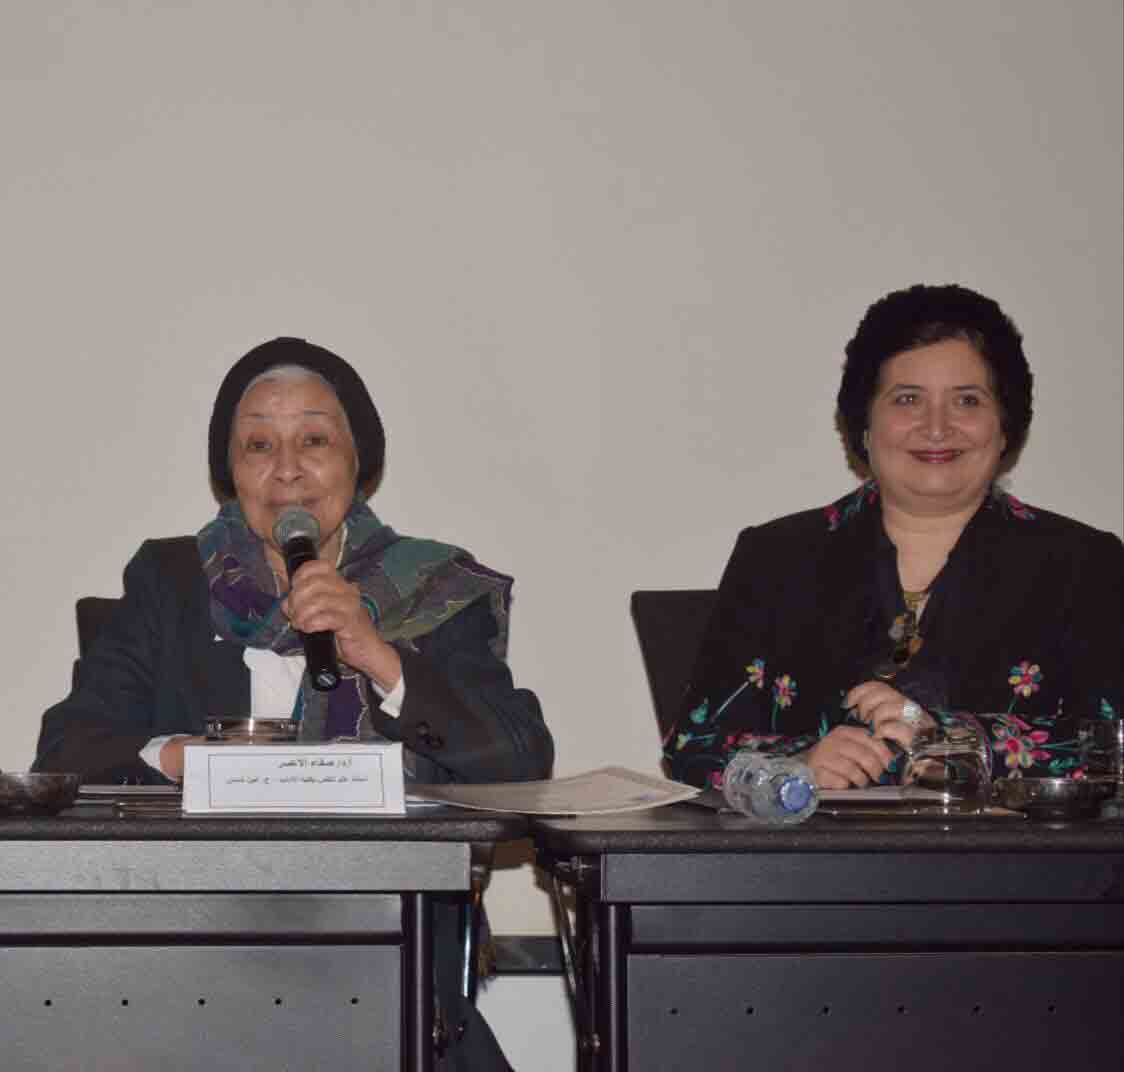 Events of the first day of the conference "Modern techniques of psychological counseling" in the Faculty of Girls